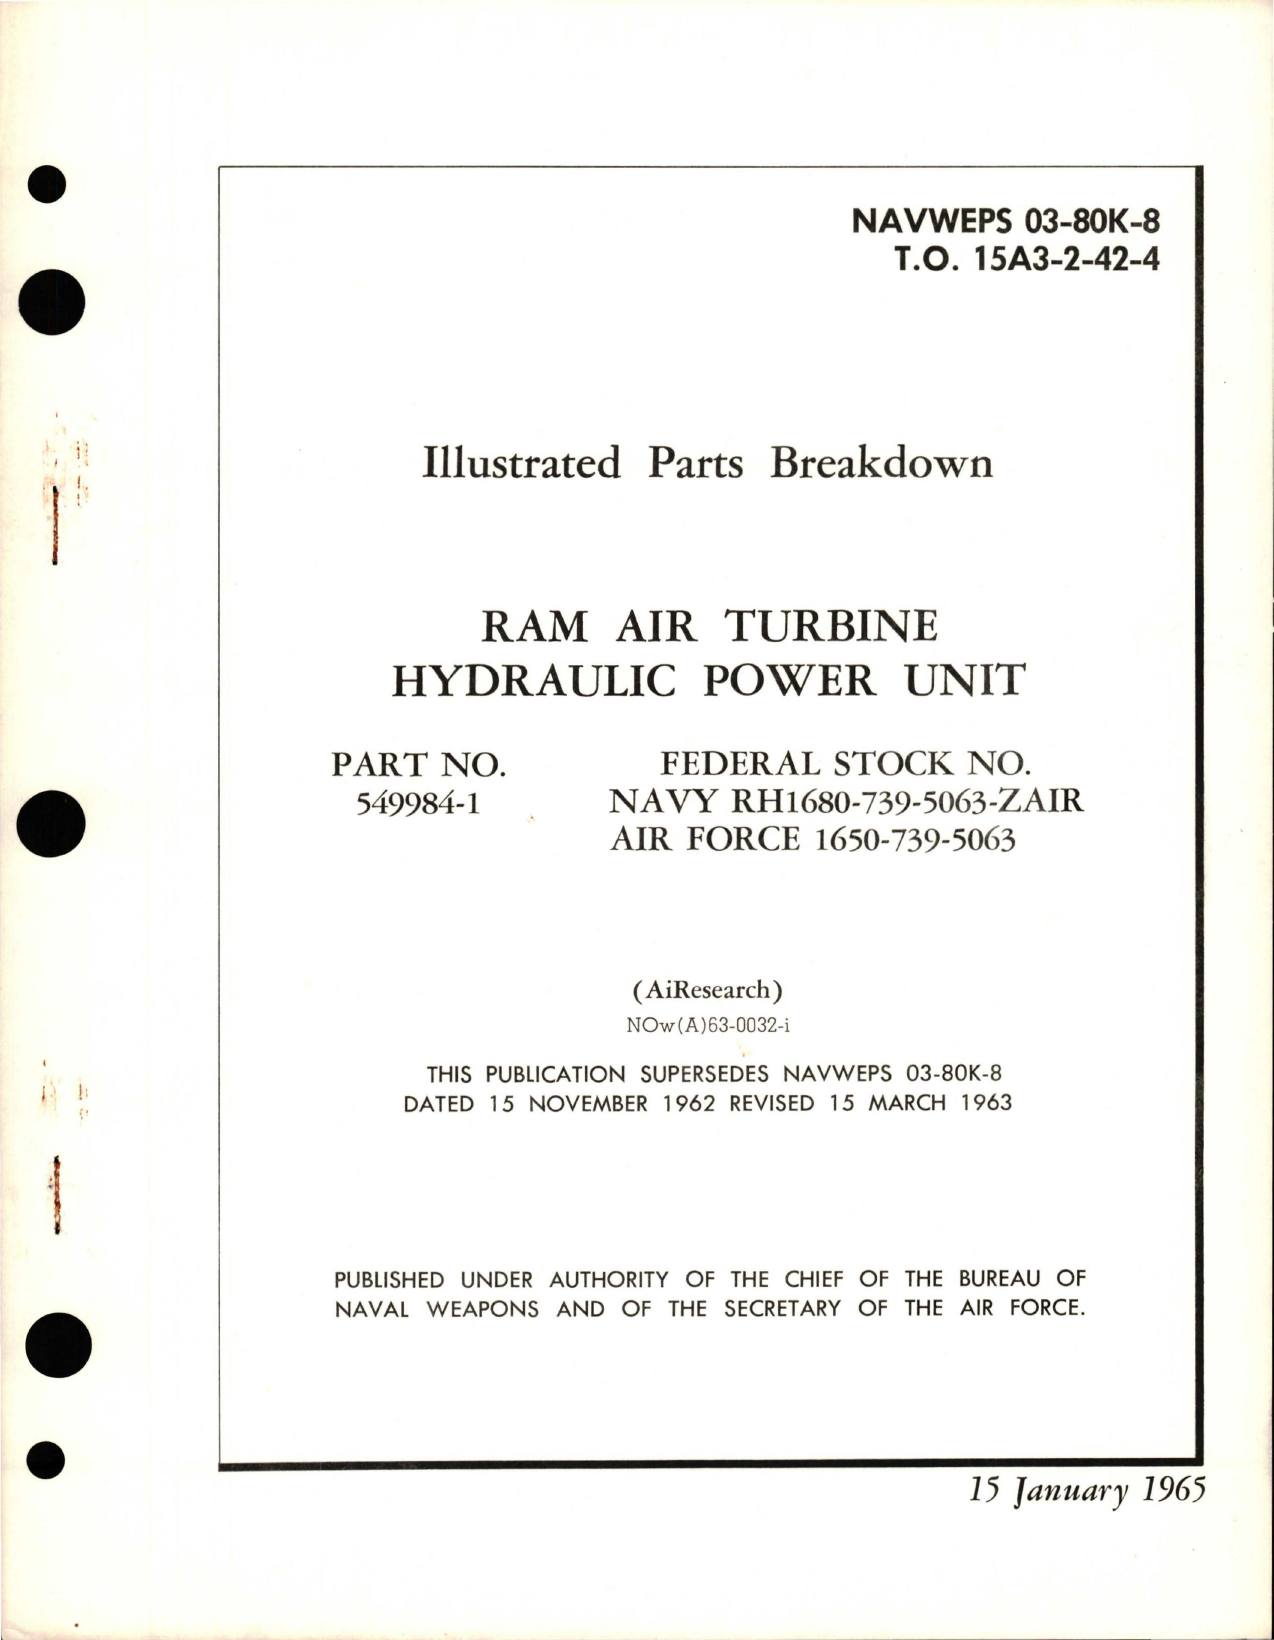 Sample page 1 from AirCorps Library document: Illustrated Parts Breakdown for Ram Air Turbine Hydraulic Power Unit - Part 549984-1